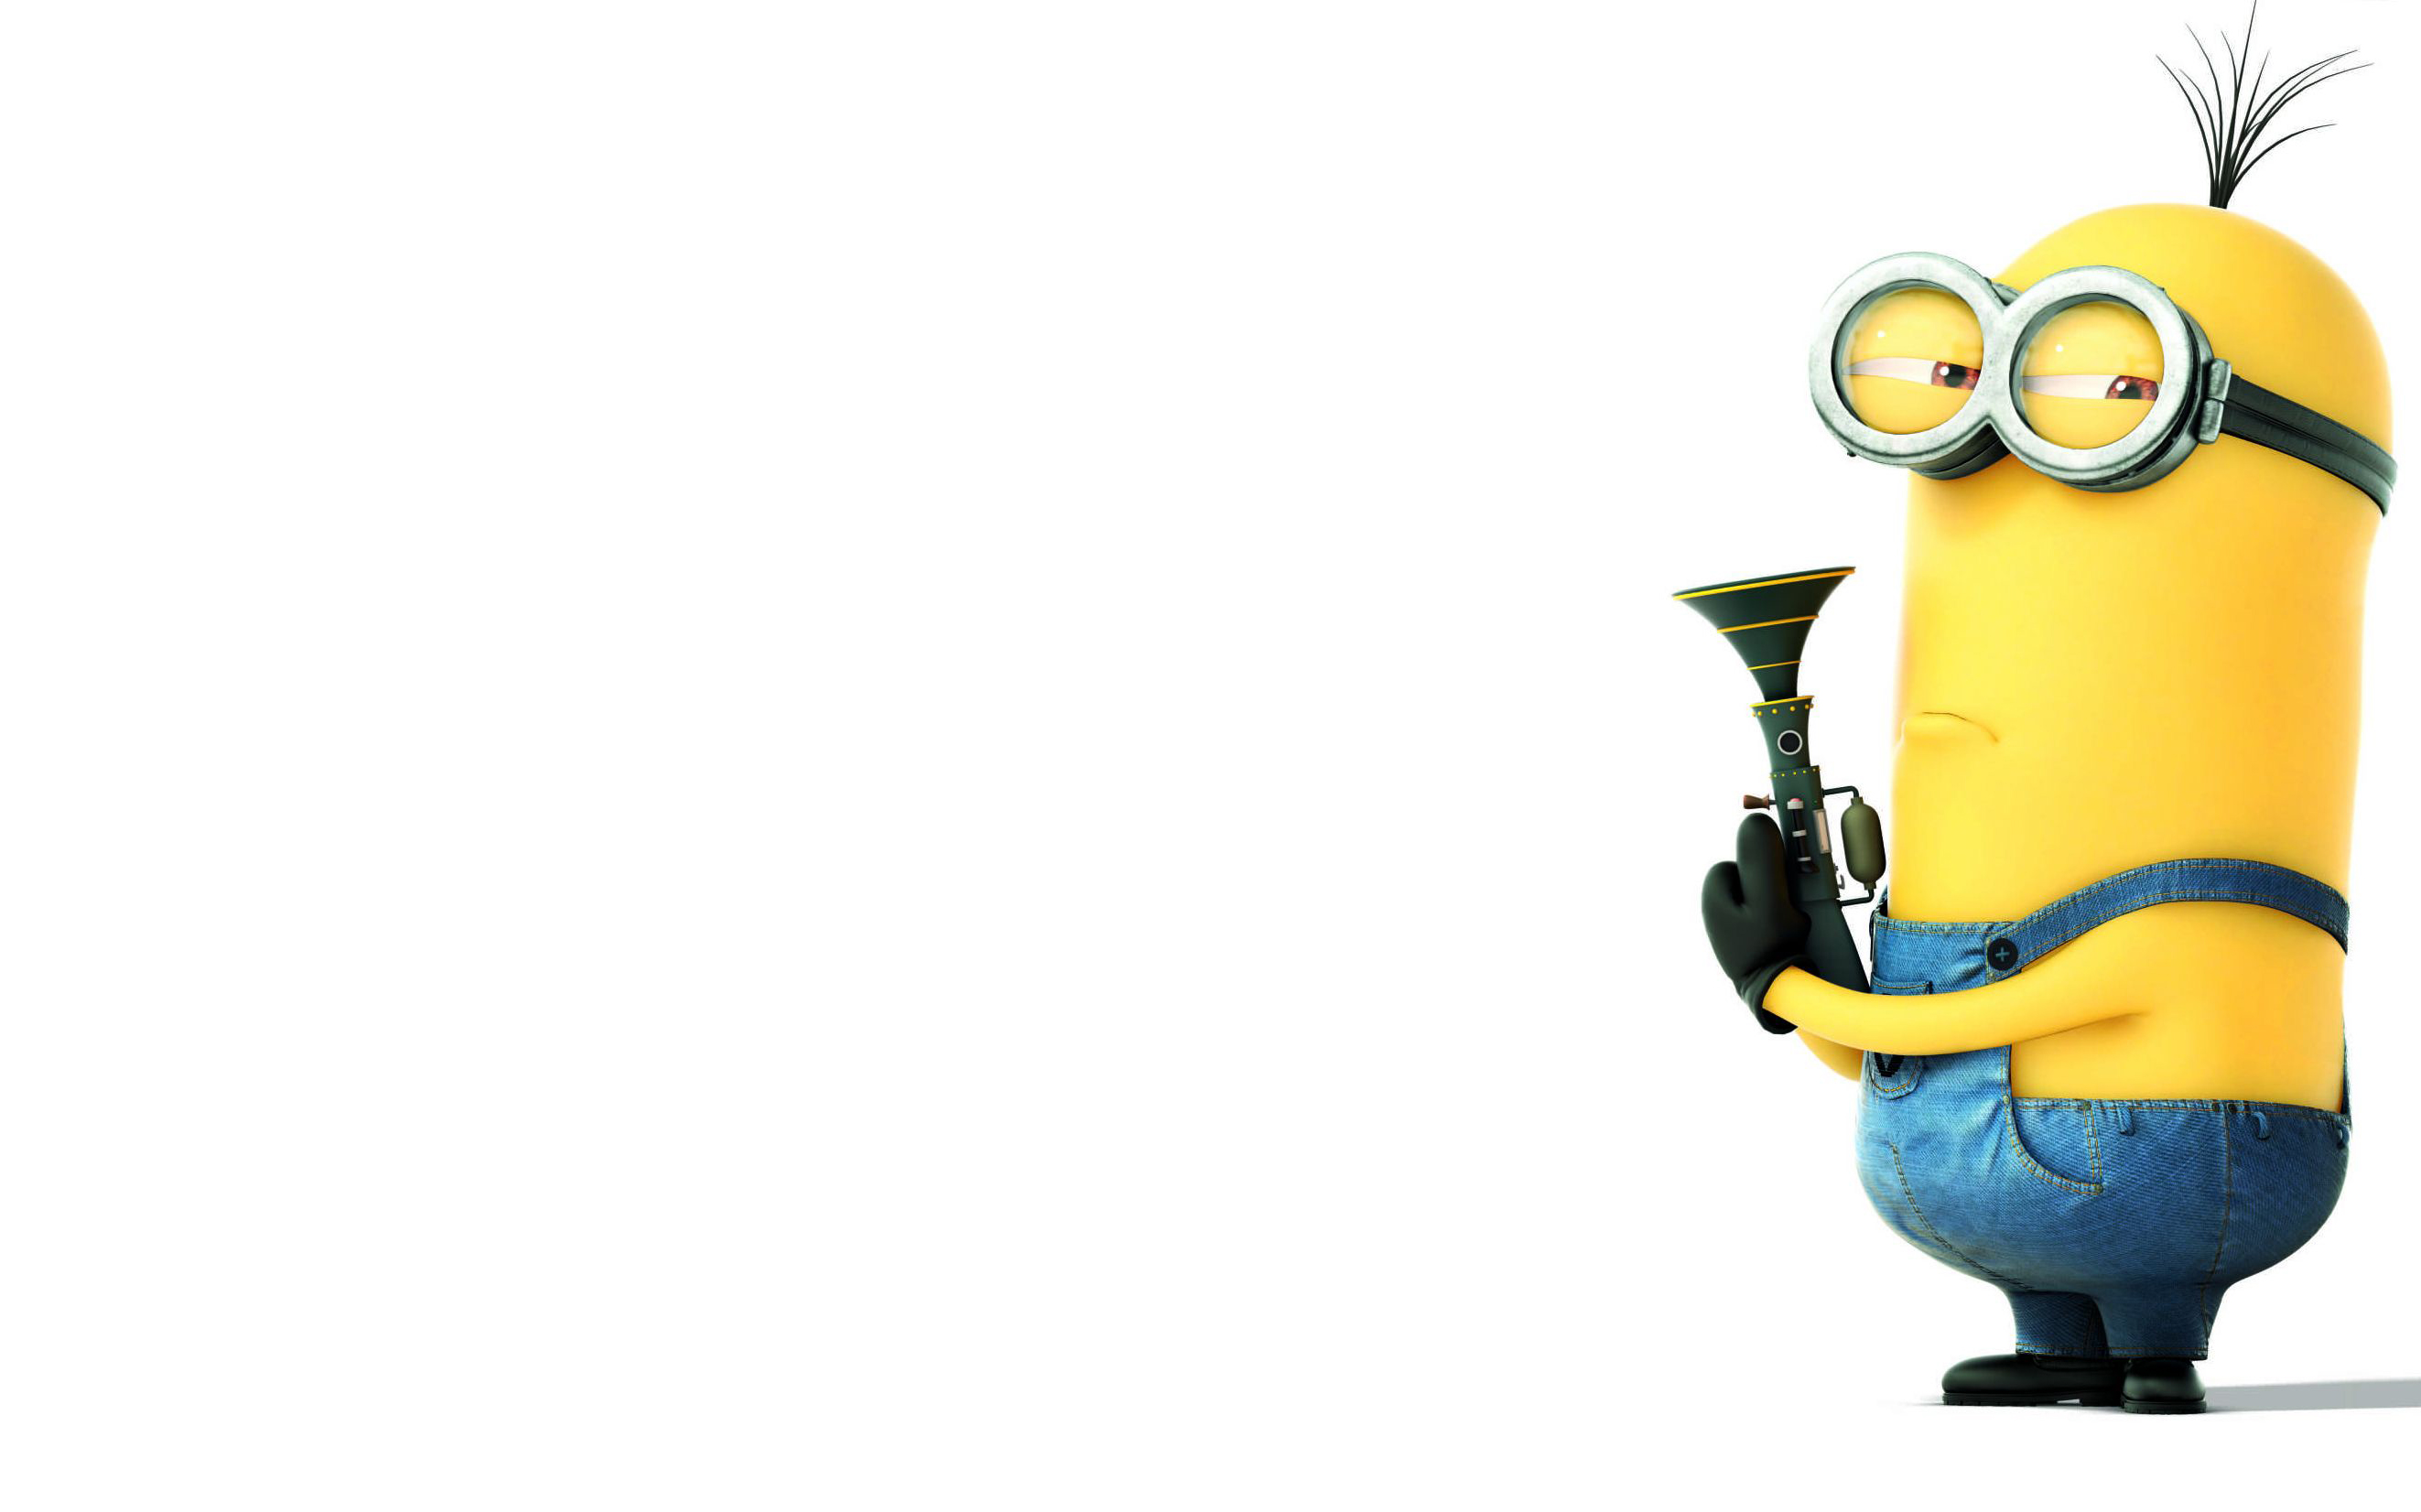 Despicable Me Minions Cute Wallpaper Pictures In High